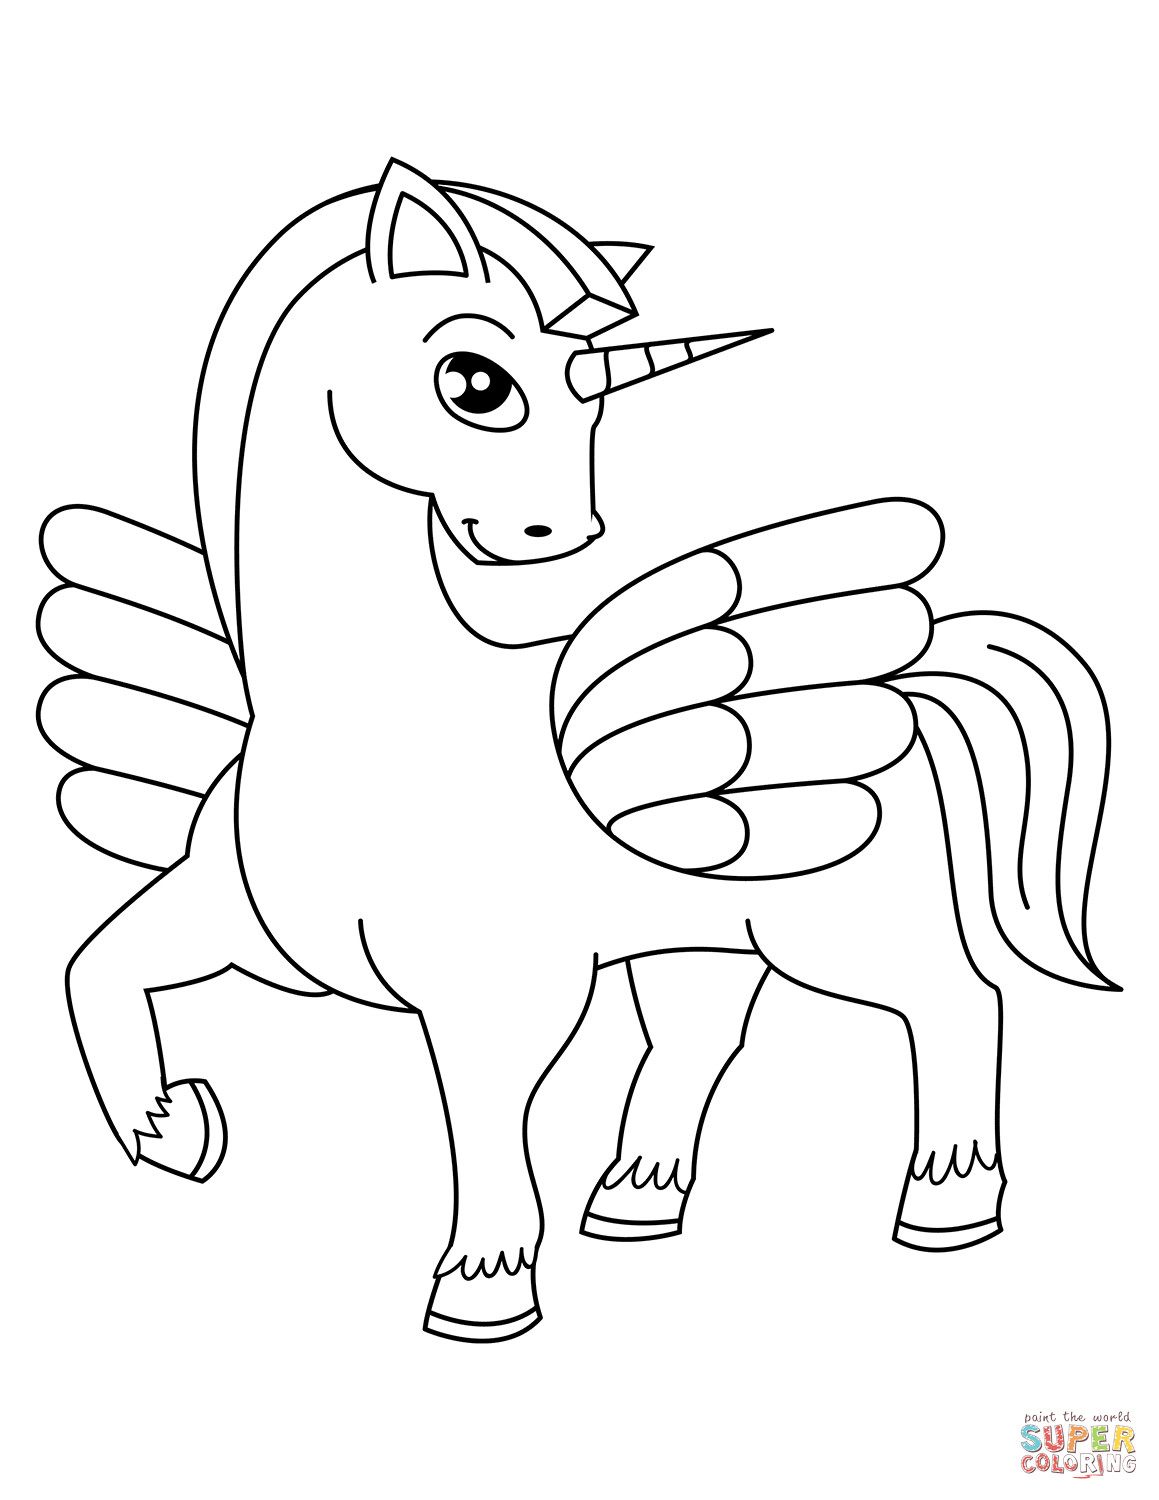 Coloring Pages For Girls Unicorn
 Cute Winged Unicorn coloring page